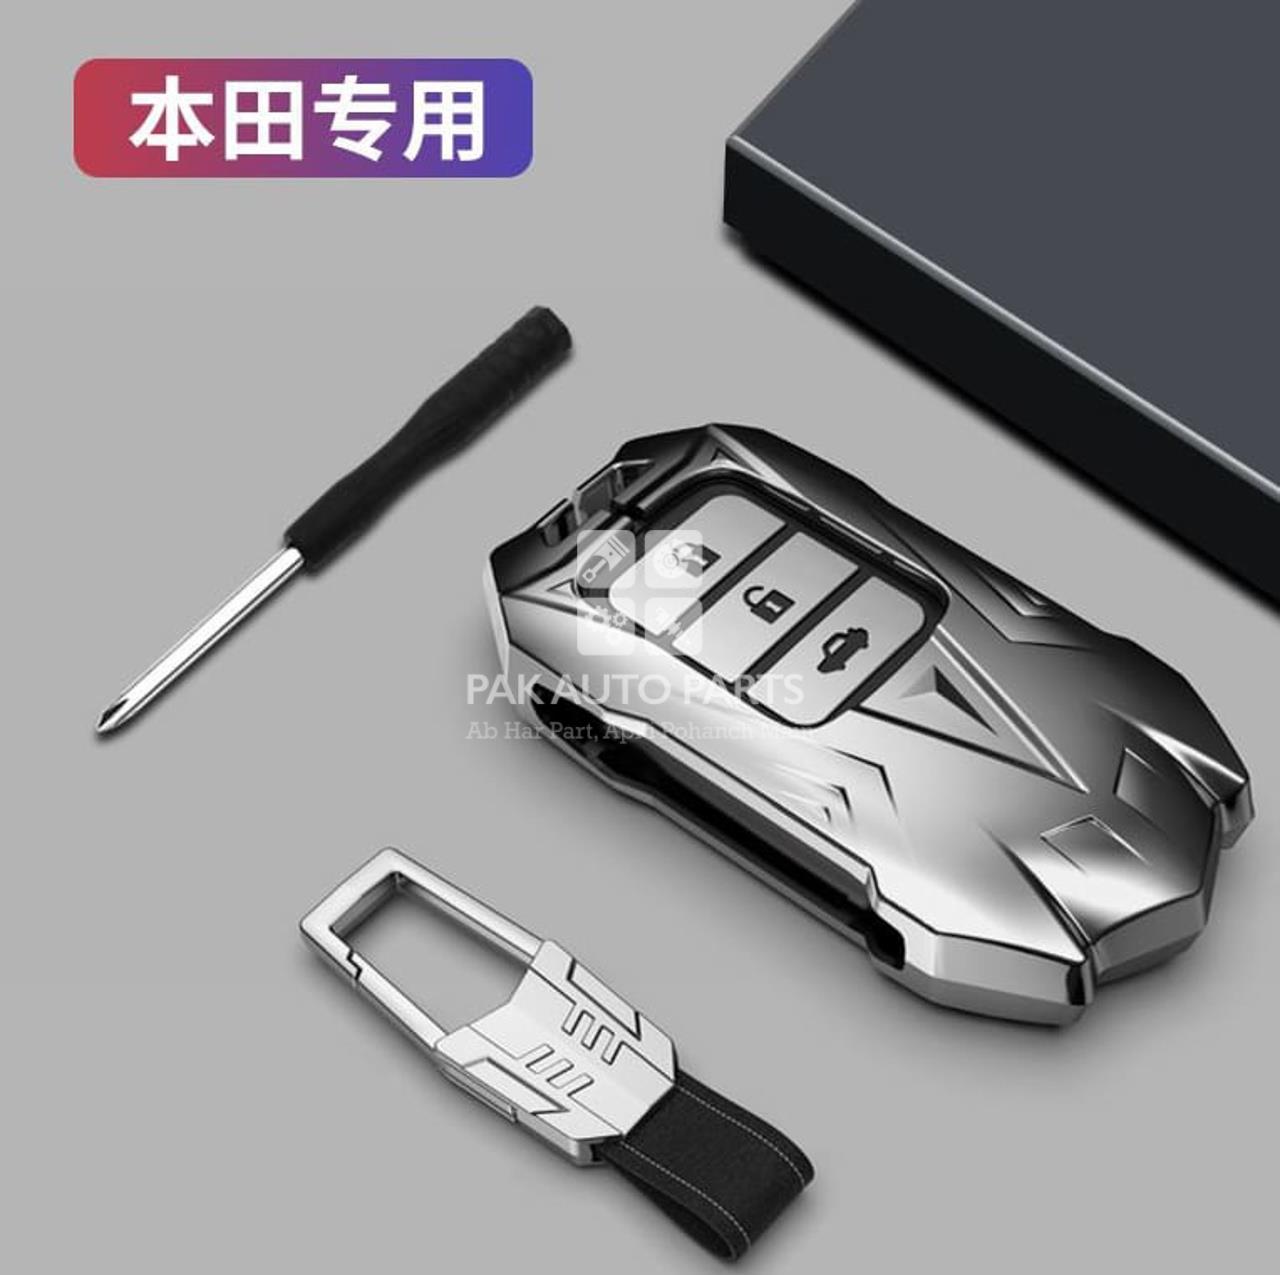 Picture of 2 in 1 Offer - Civic X / City 2022 / BRV Remote Key Cover Made of Metal + Push Start Button Cover